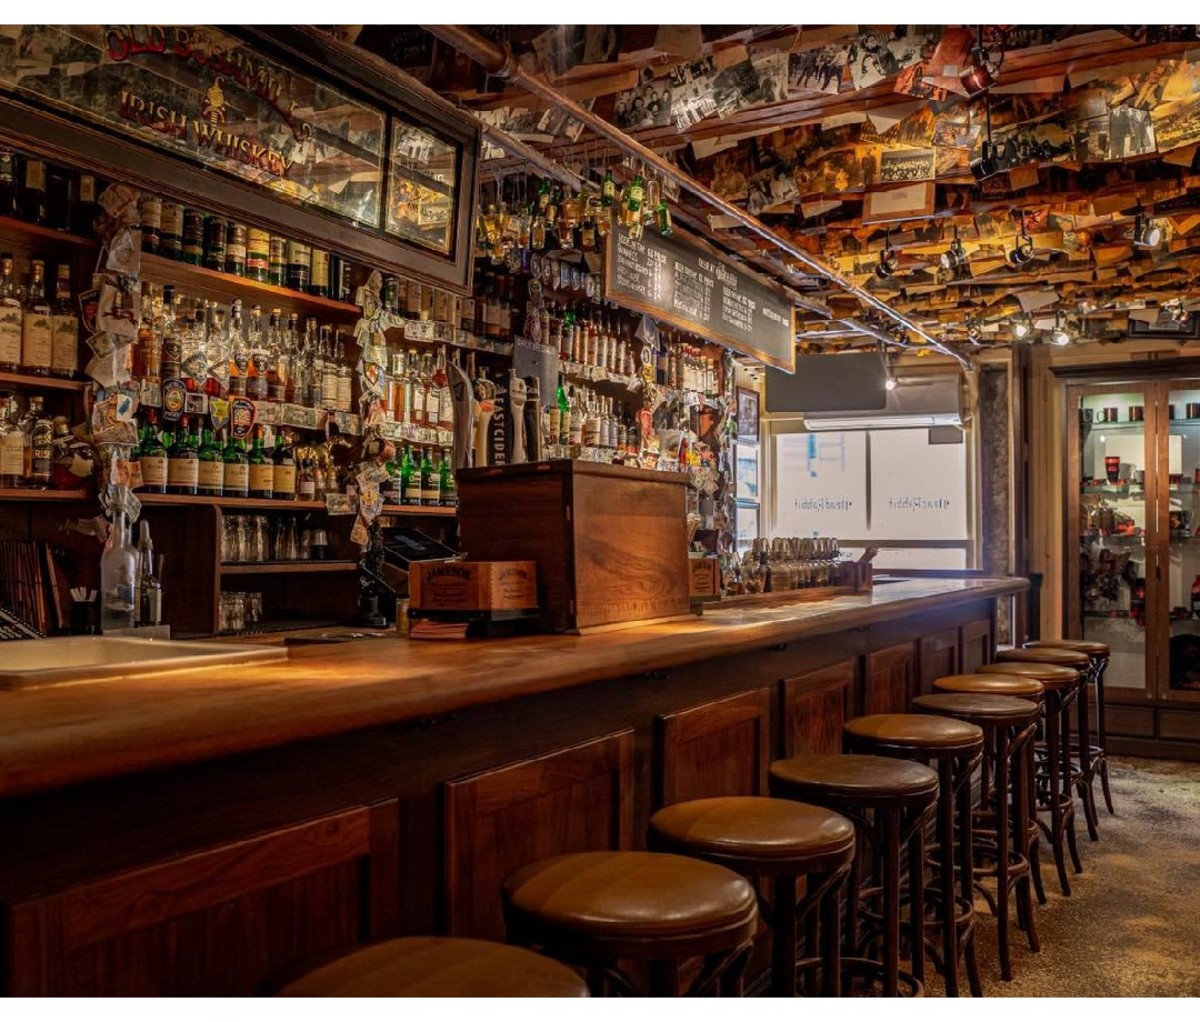 View of the bar (empty) at The Dead Rabbit in New York City